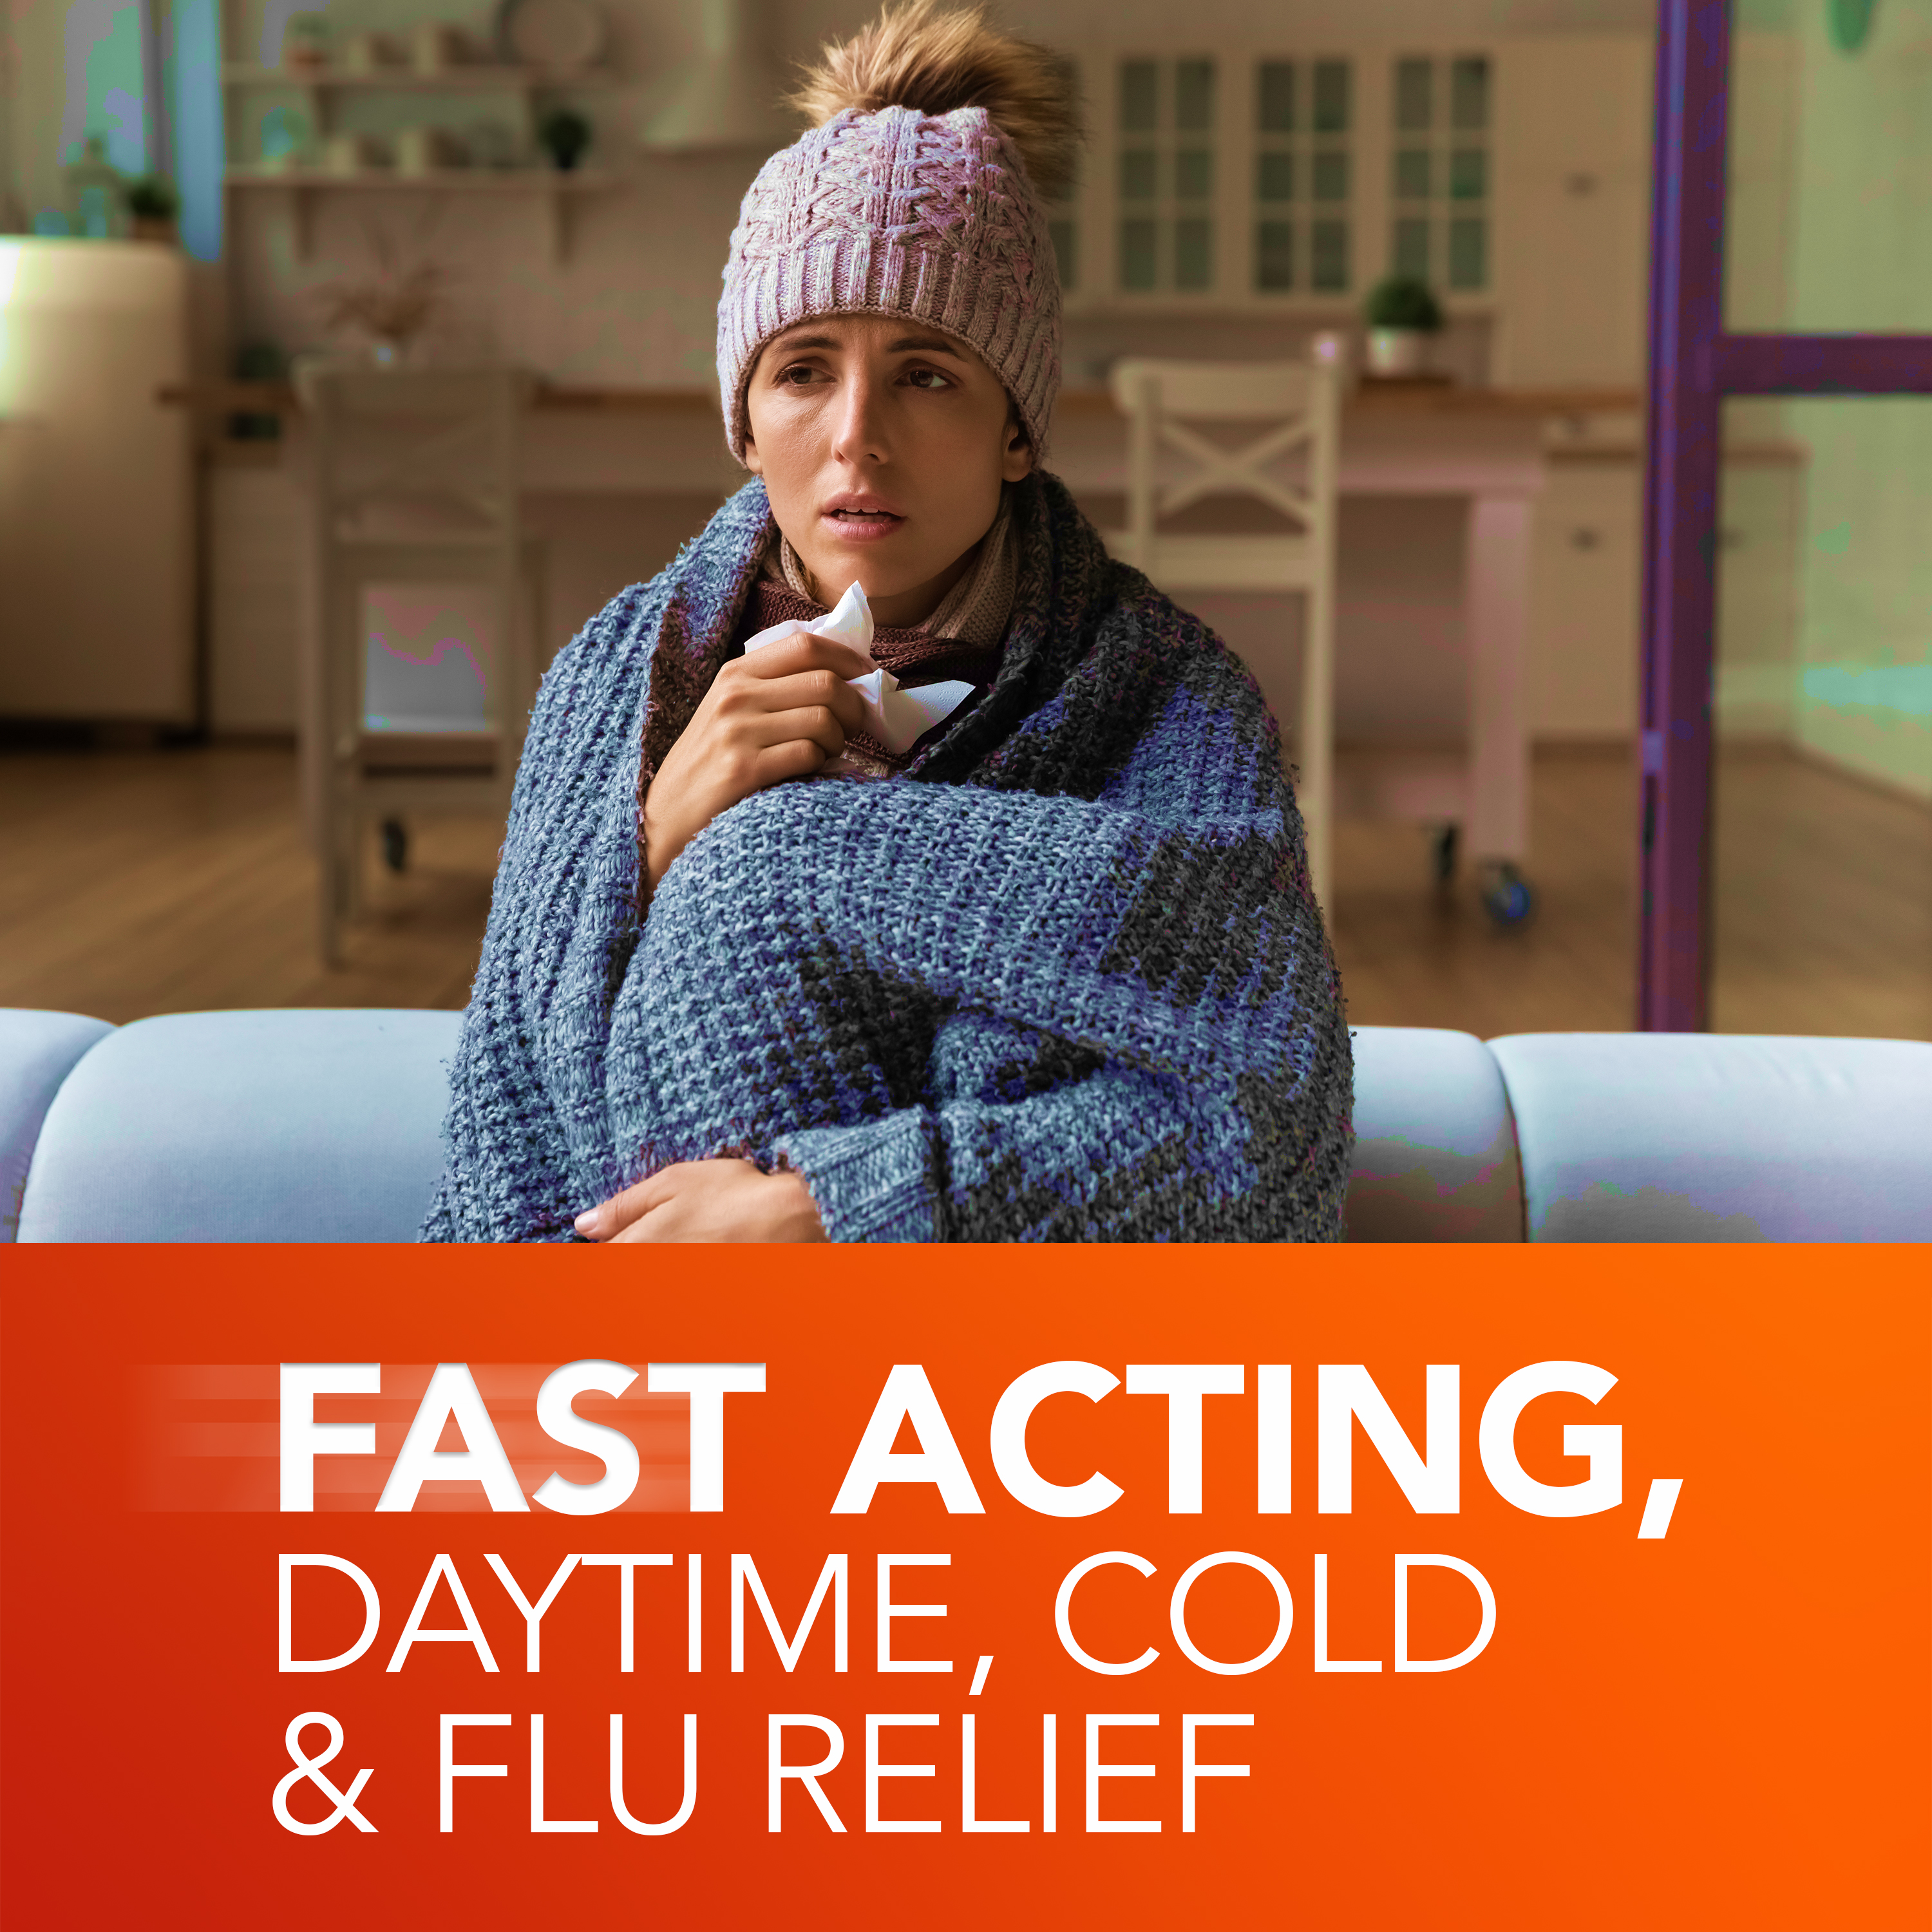 Fast Acting, Daytime, cold & relief